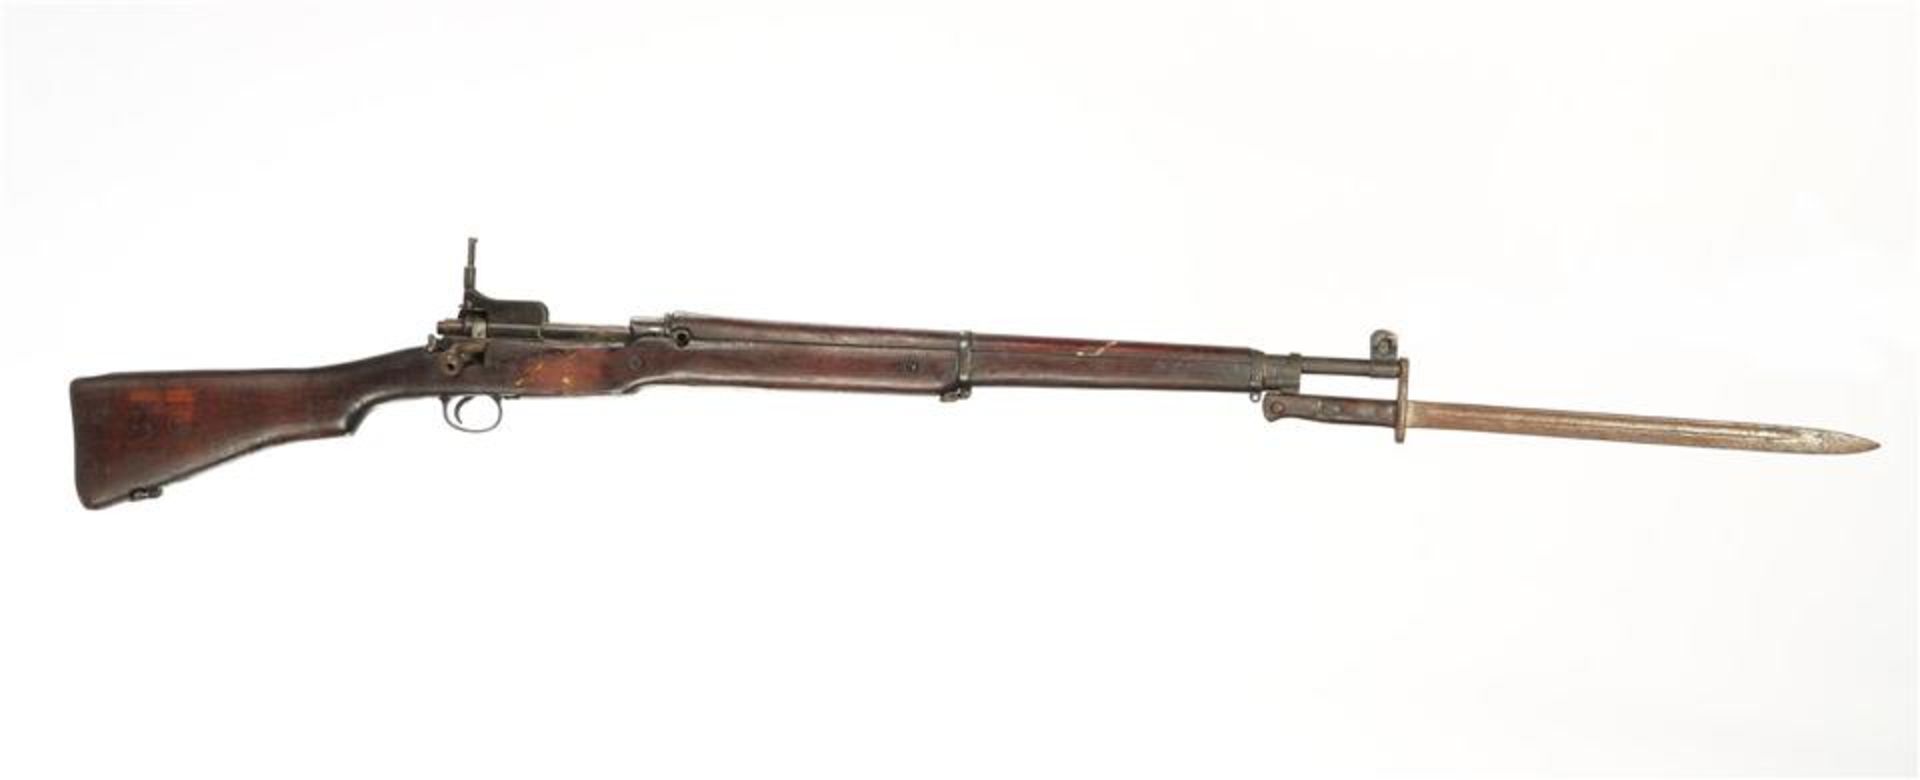 19th century carbine with bayonet, 157 cm (disabled)